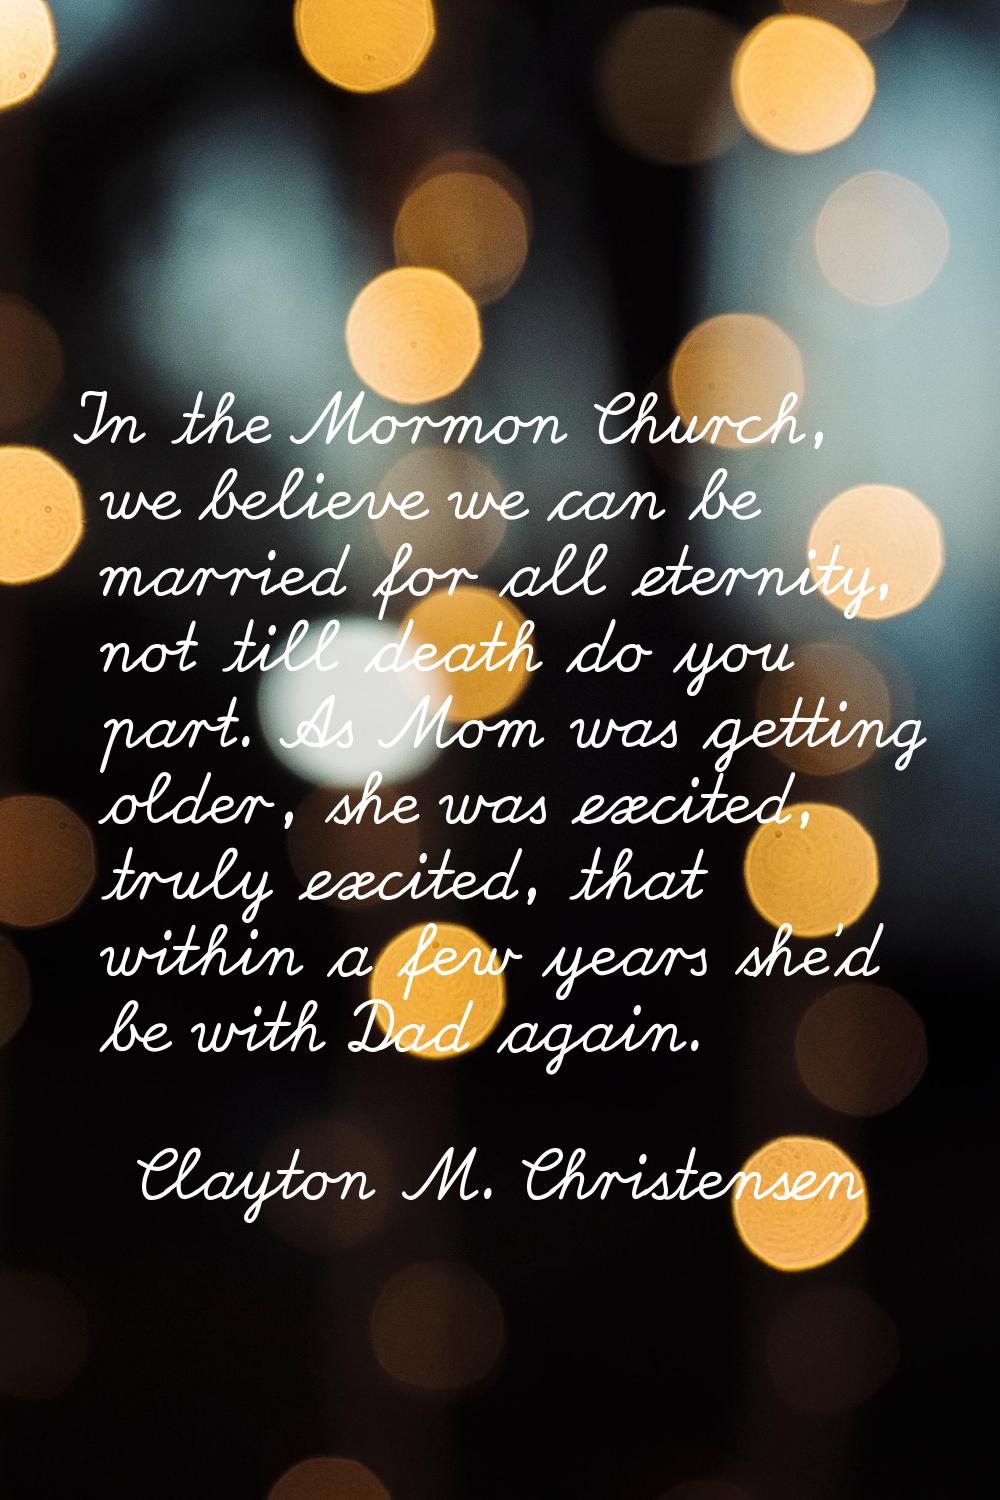 In the Mormon Church, we believe we can be married for all eternity, not till death do you part. As